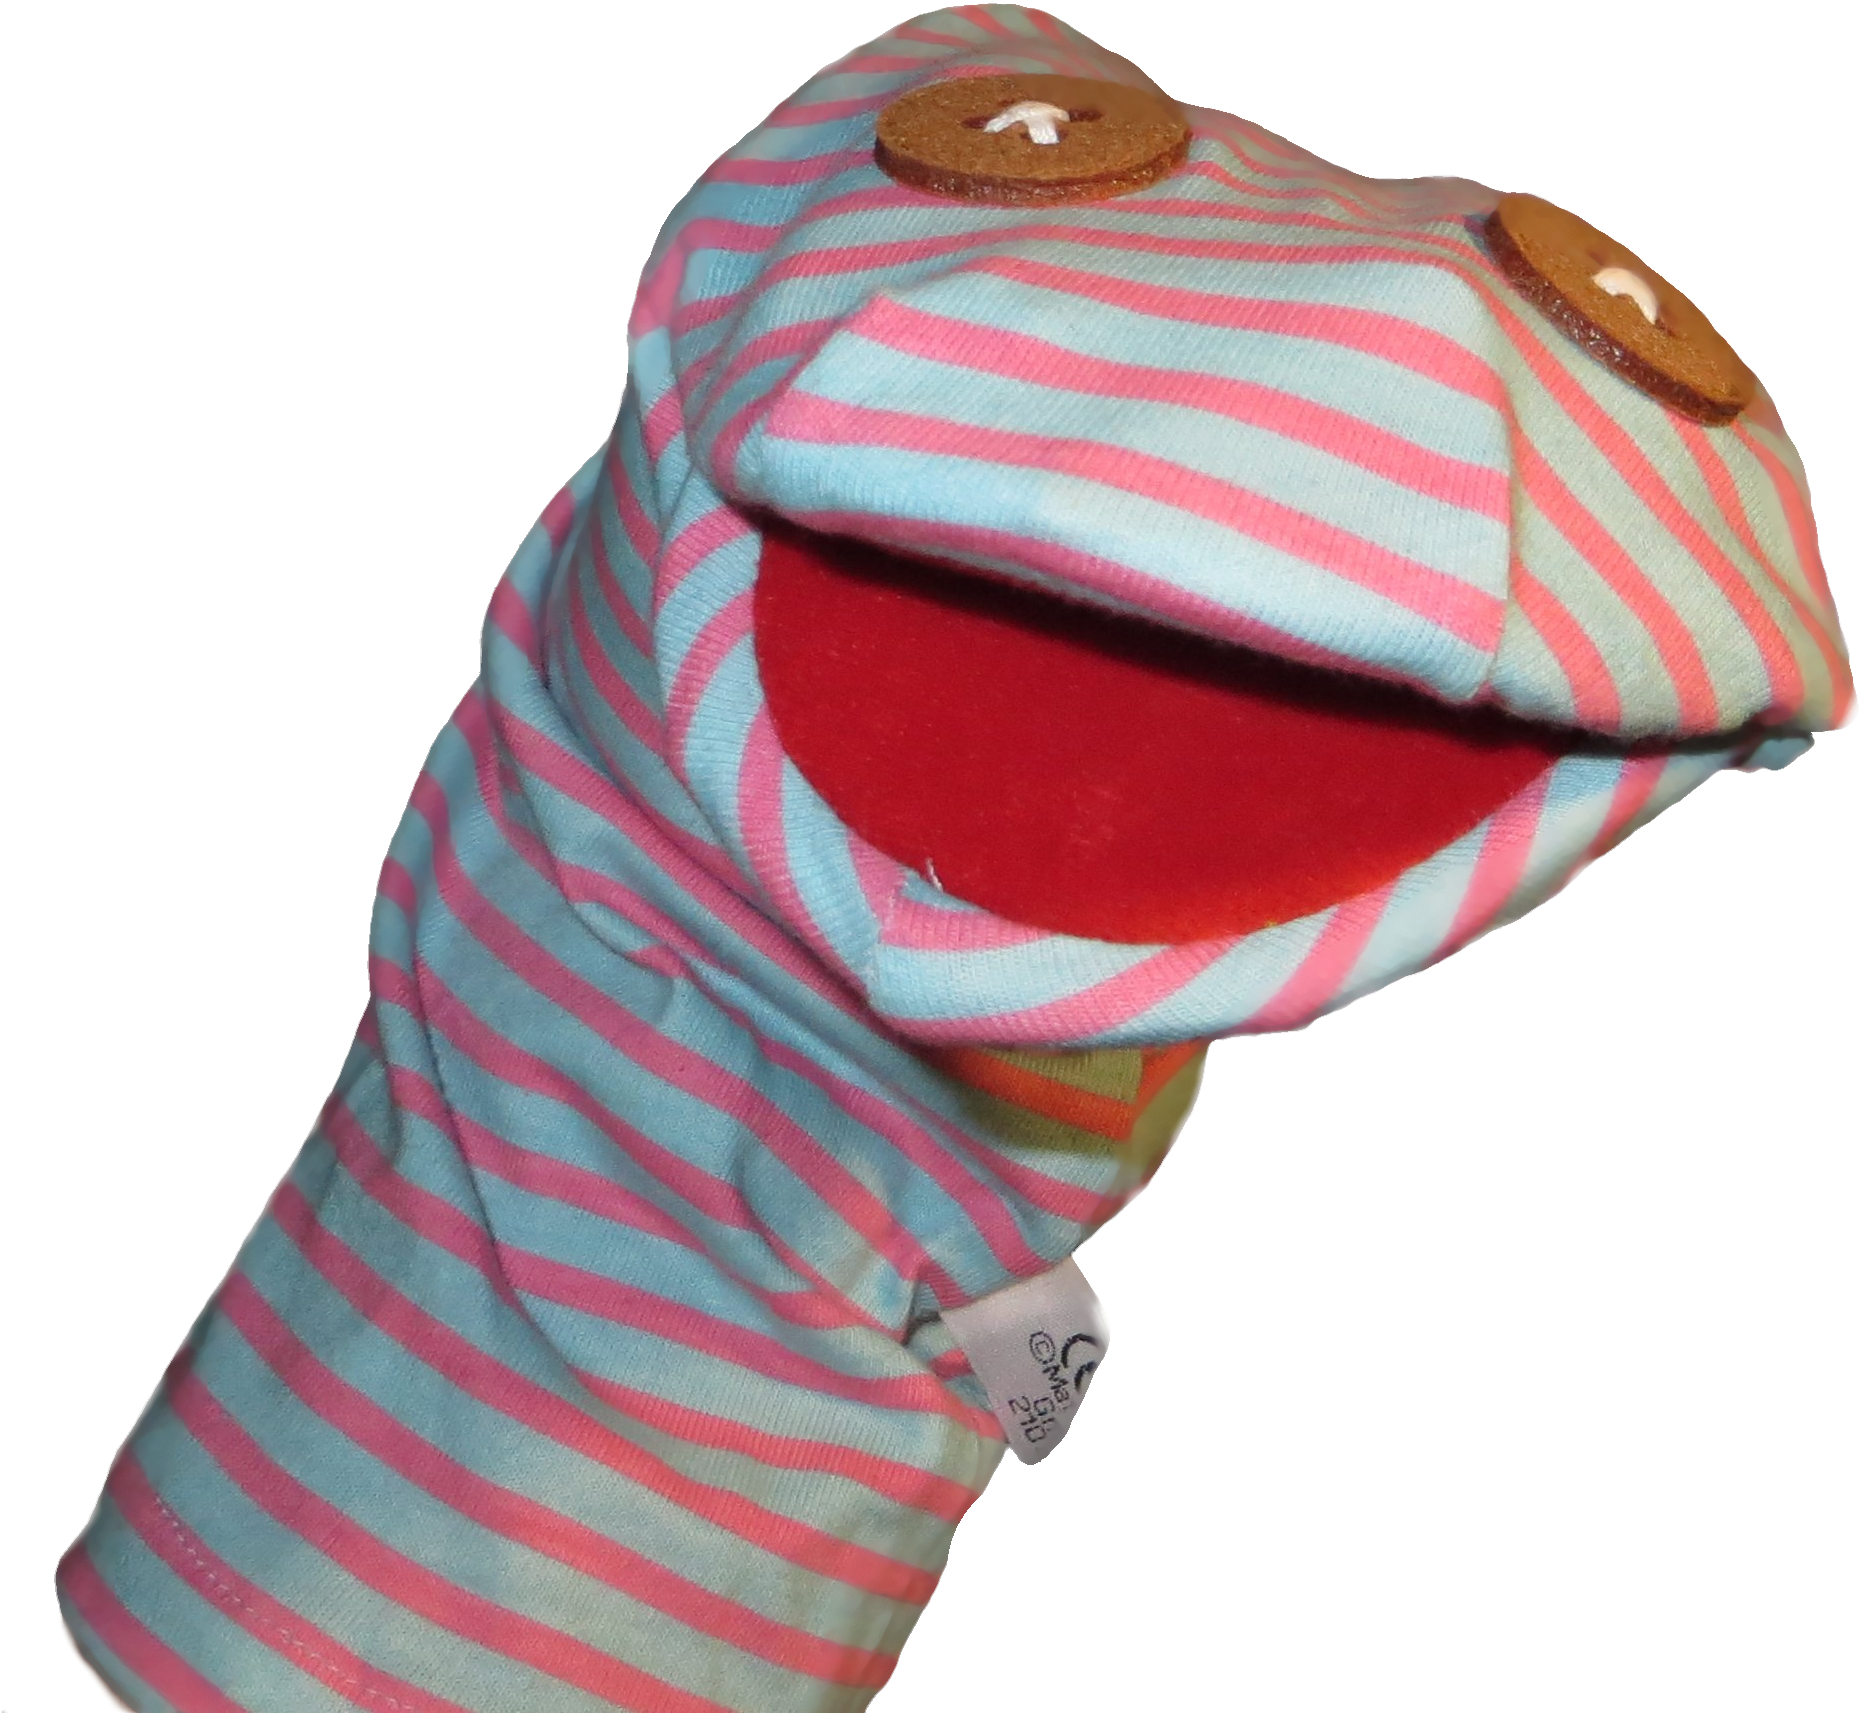 A Hand Puppet With A Striped Face